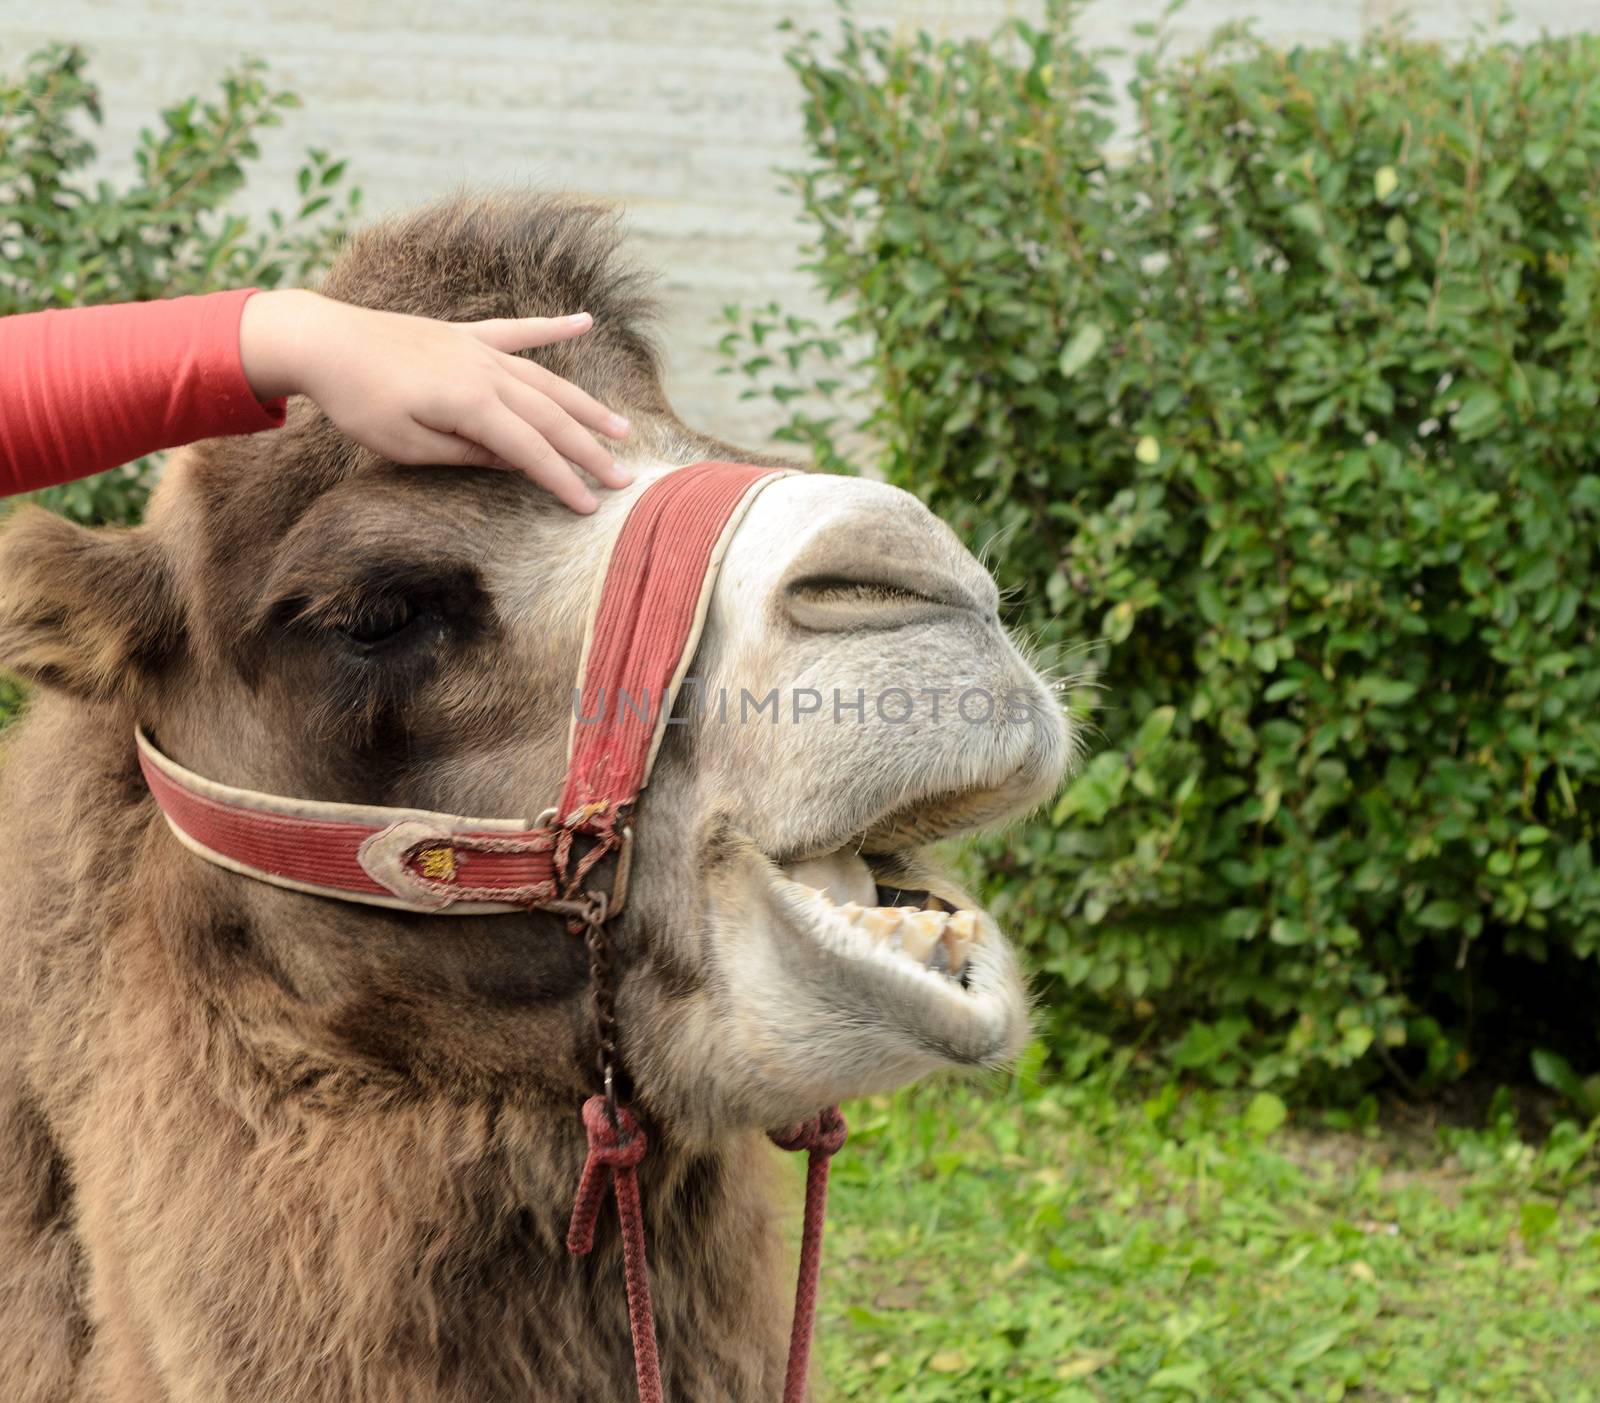 girl strokes a camel and he moans in pleasure